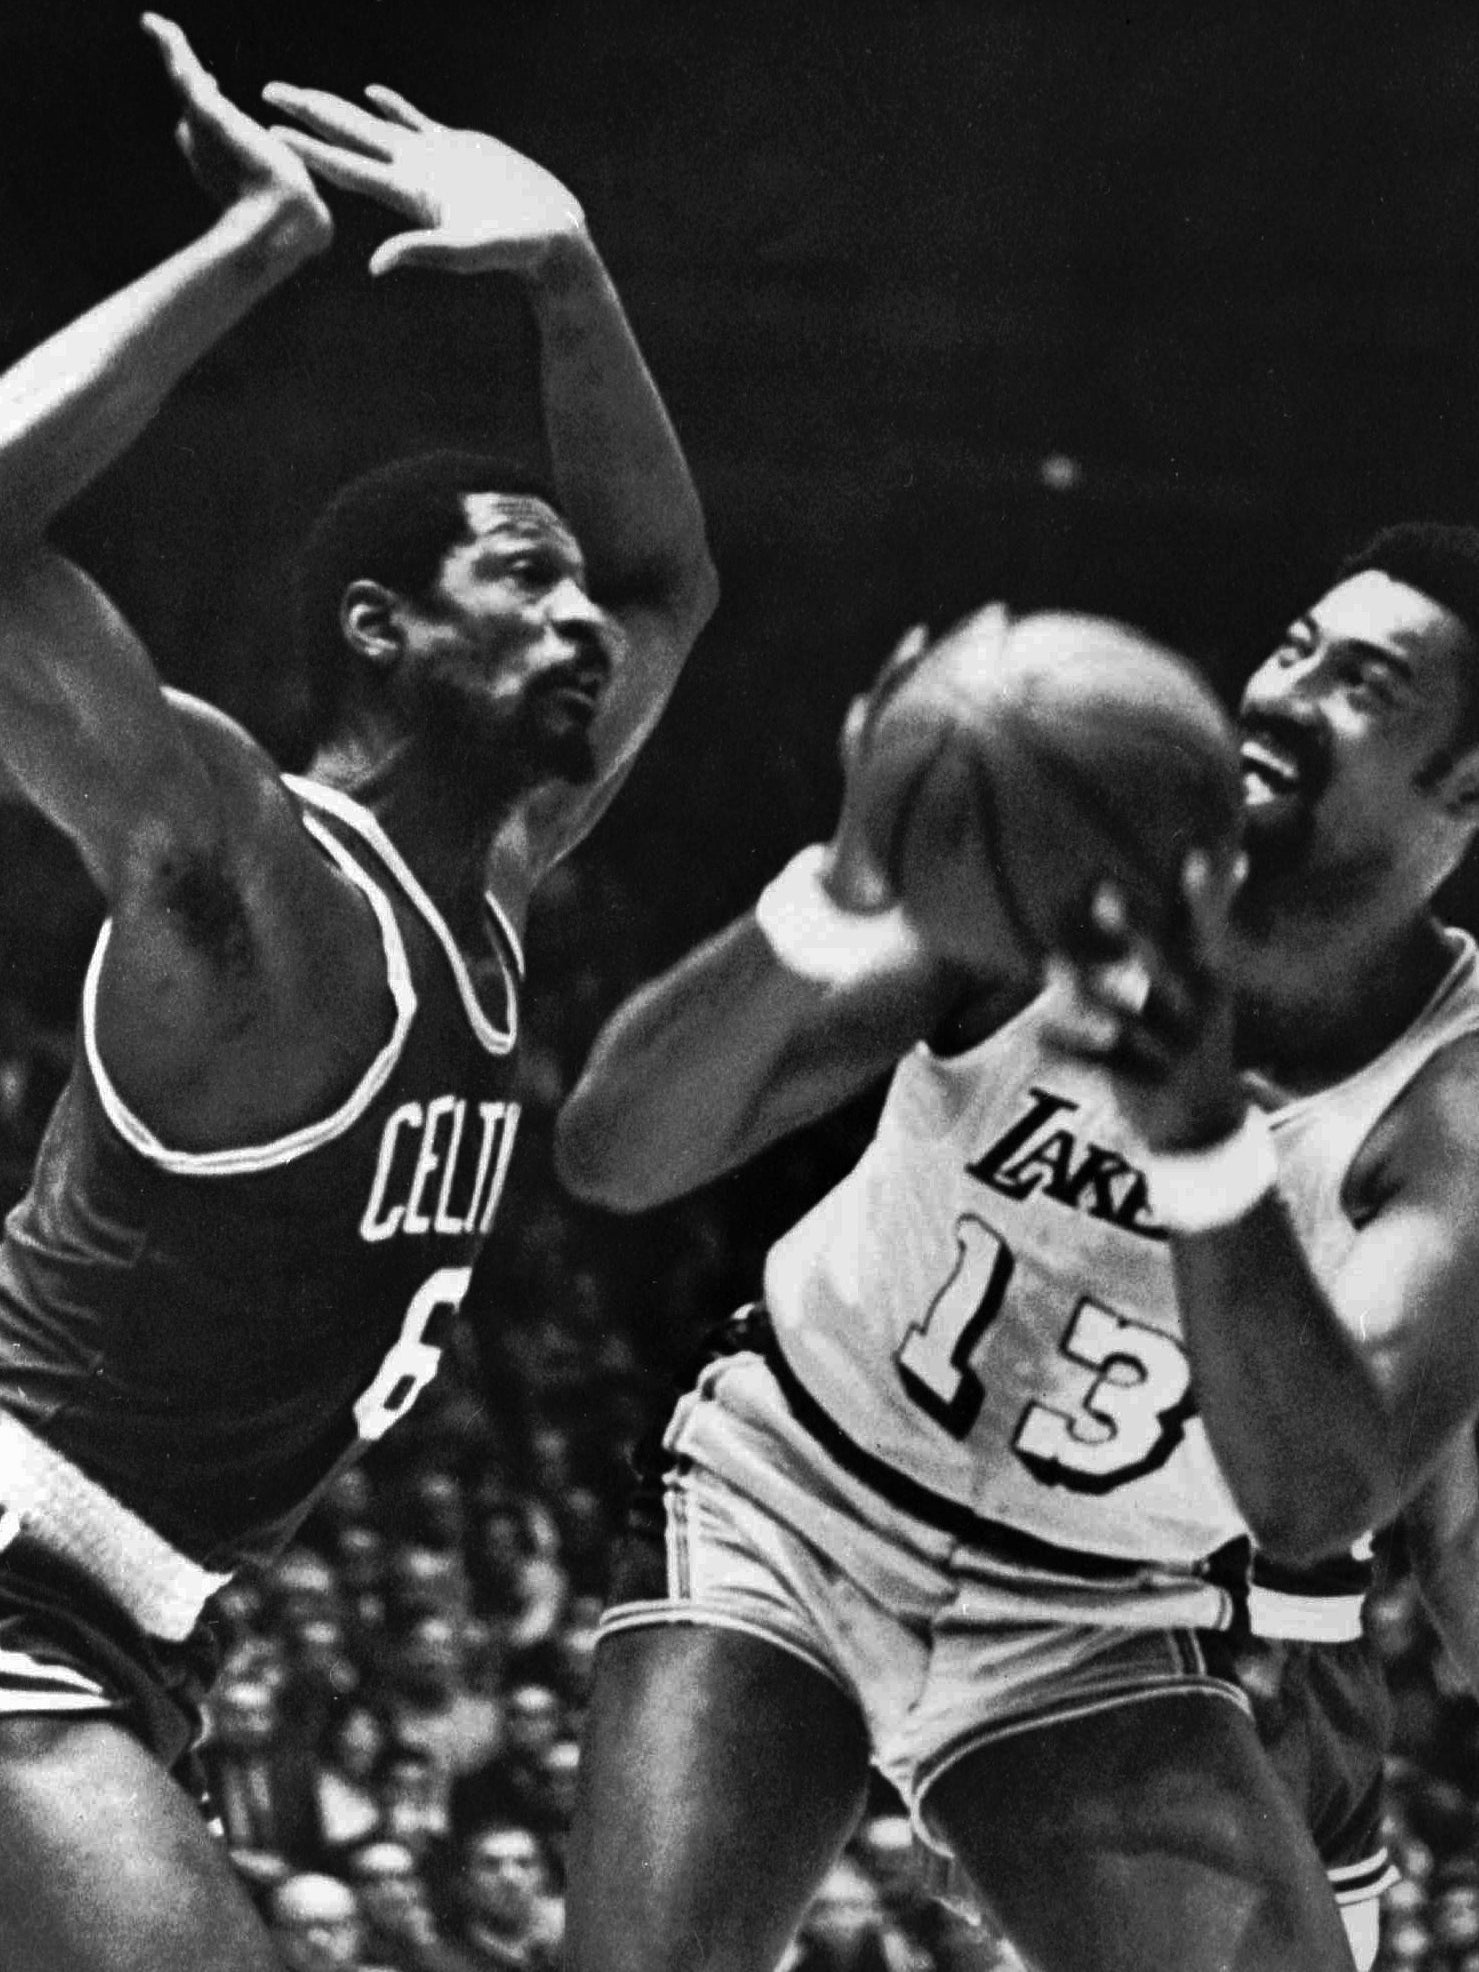 Russell’s battles with Los Angeles Lakers star Wilt Chamberlain powered the NBA’s popularity in the Sixties